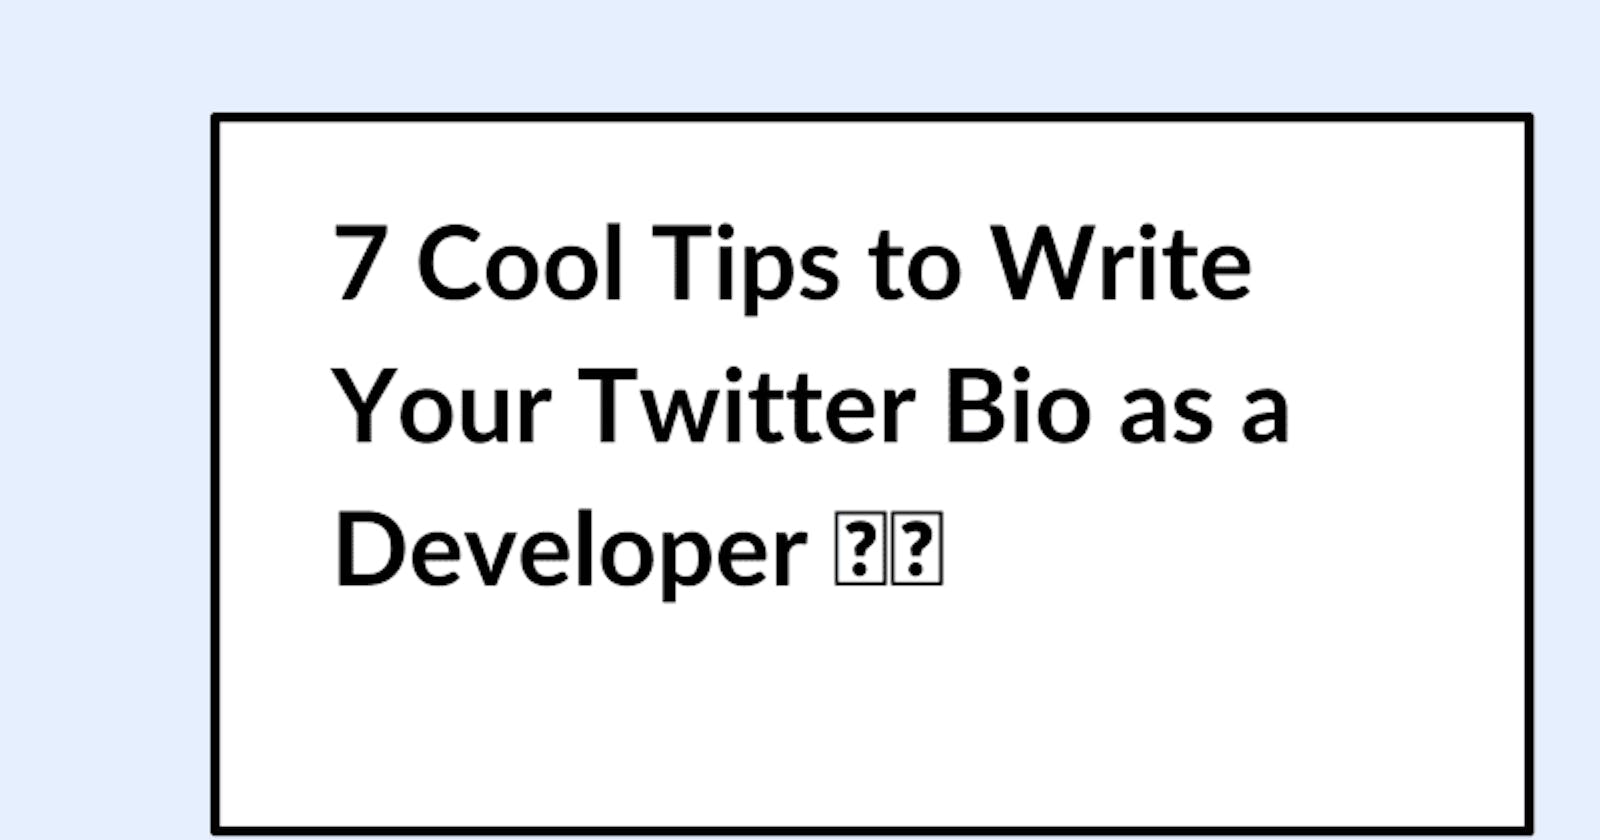 7 Cool Tips to Write Your Twitter Bio as a Developer 👍💯